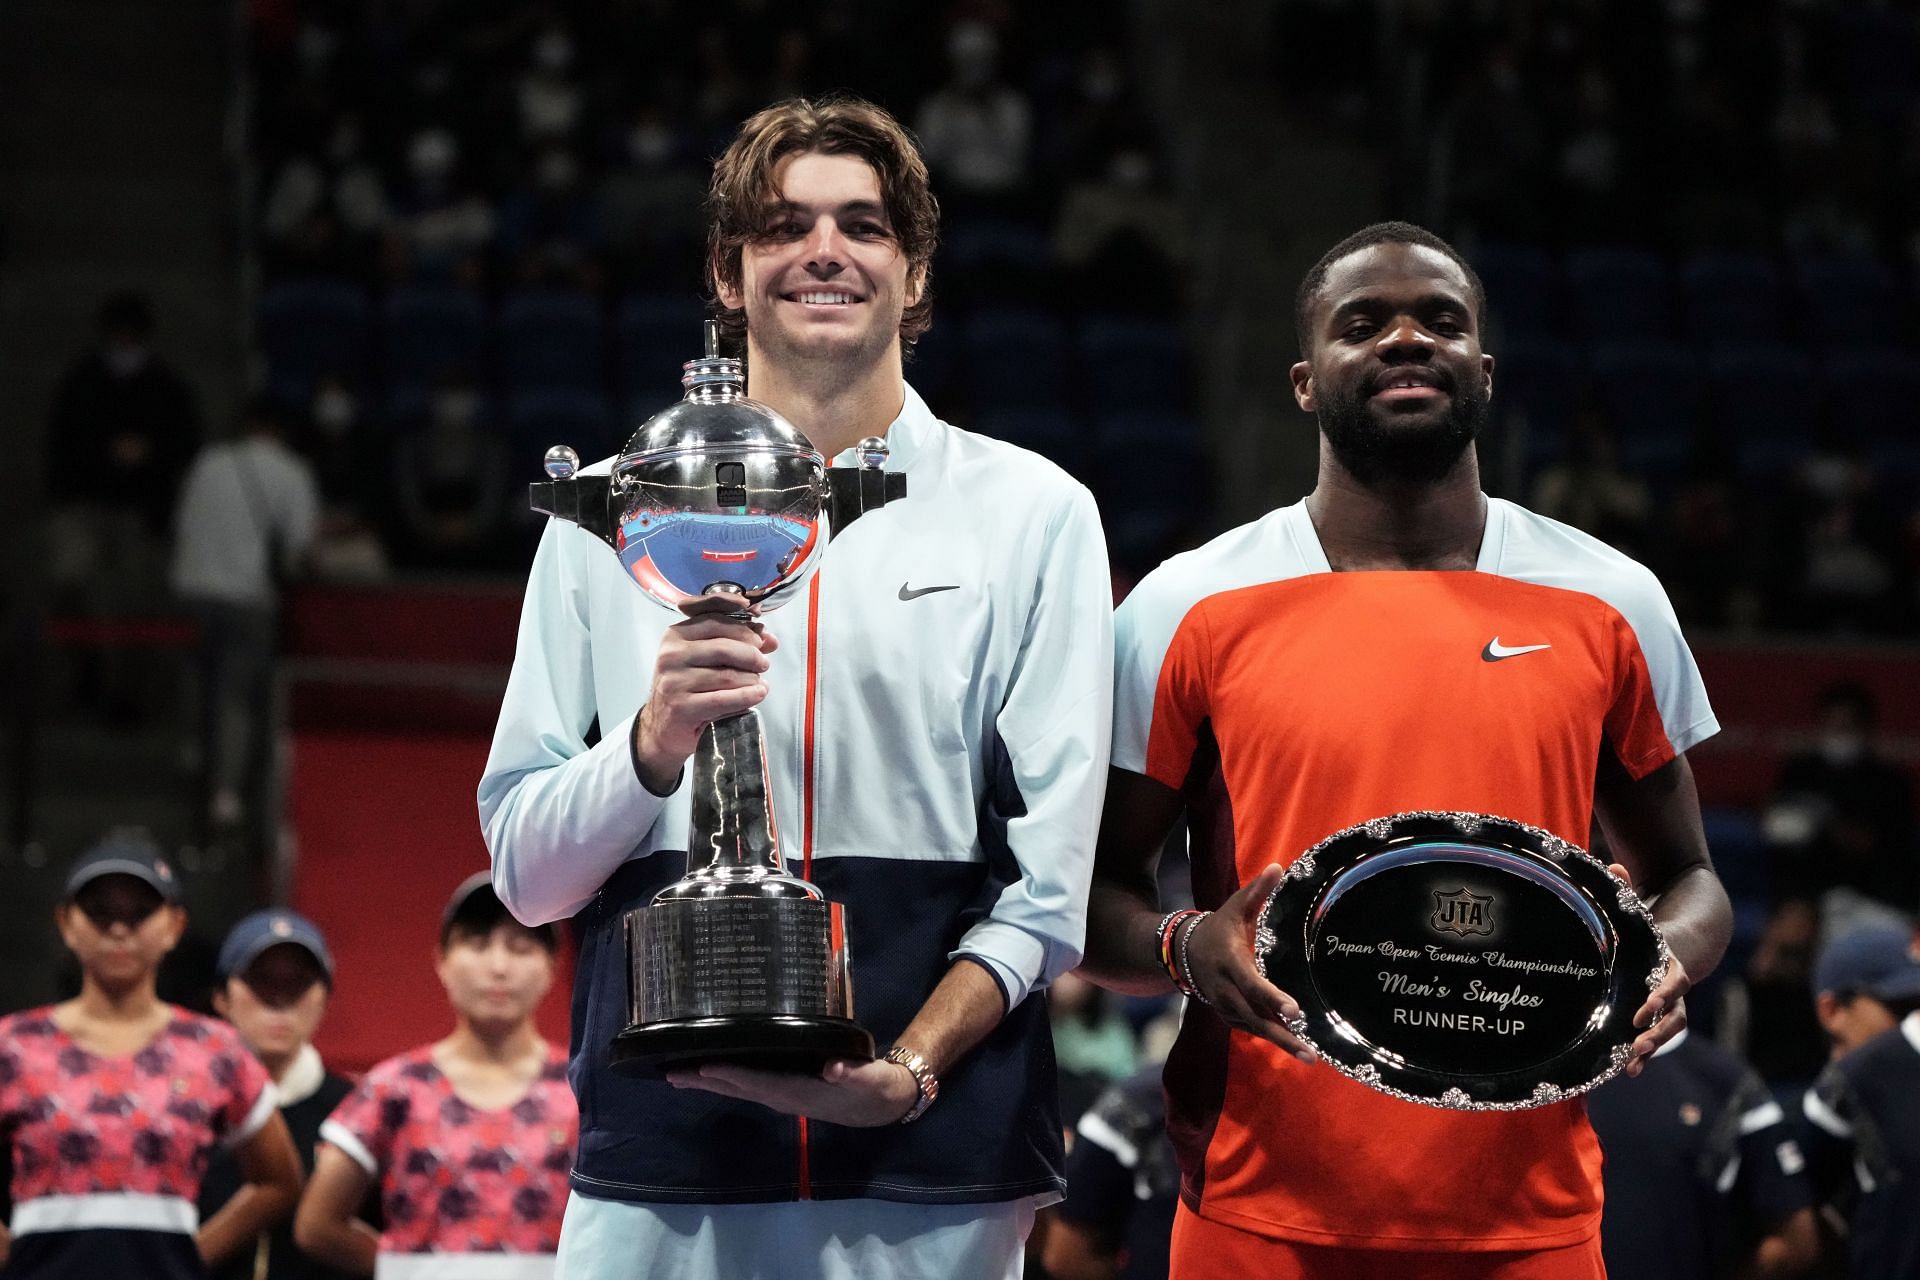 “It’s been a year” – Japan Open champion Taylor Fritz ecstatic about ...